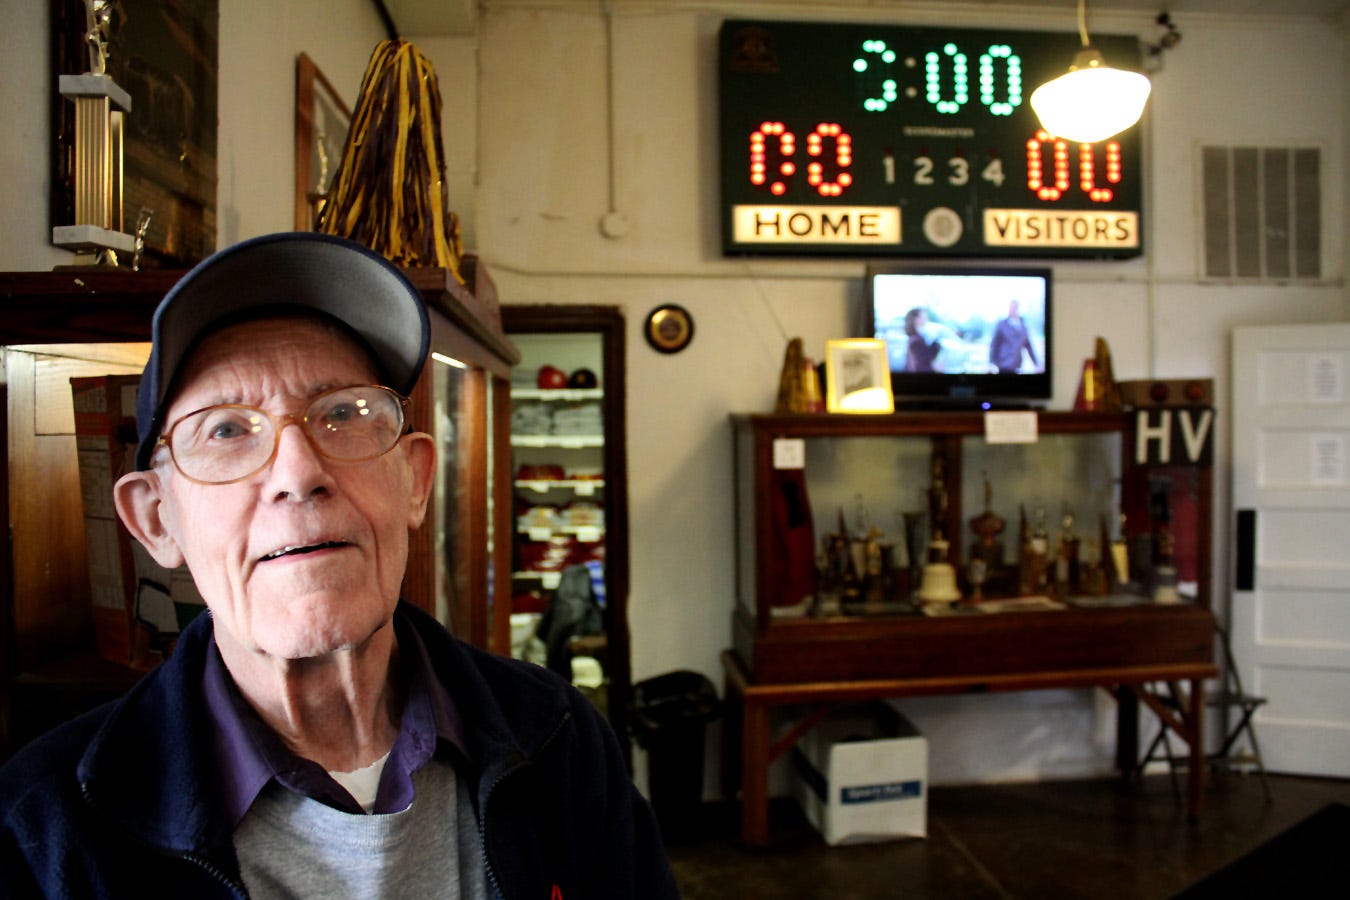 Knightstown native Bill Sitler is one of the few remaining citizens who actually played ball in the gym as a high school student. Sitler has been an active Hoosier Gym volunteer for decades, having served as treasurer, tour guide and general goodwill ambassador. Present when Hoosiers Director David Anspaugh visited, Sitler told him how he’d played ball in the gym as a youngster. That brief story was enough to move Anspaugh to tears, overcome apparently by the nostalgia. Here, Sitler is show in the Hoosier Gym foyer.